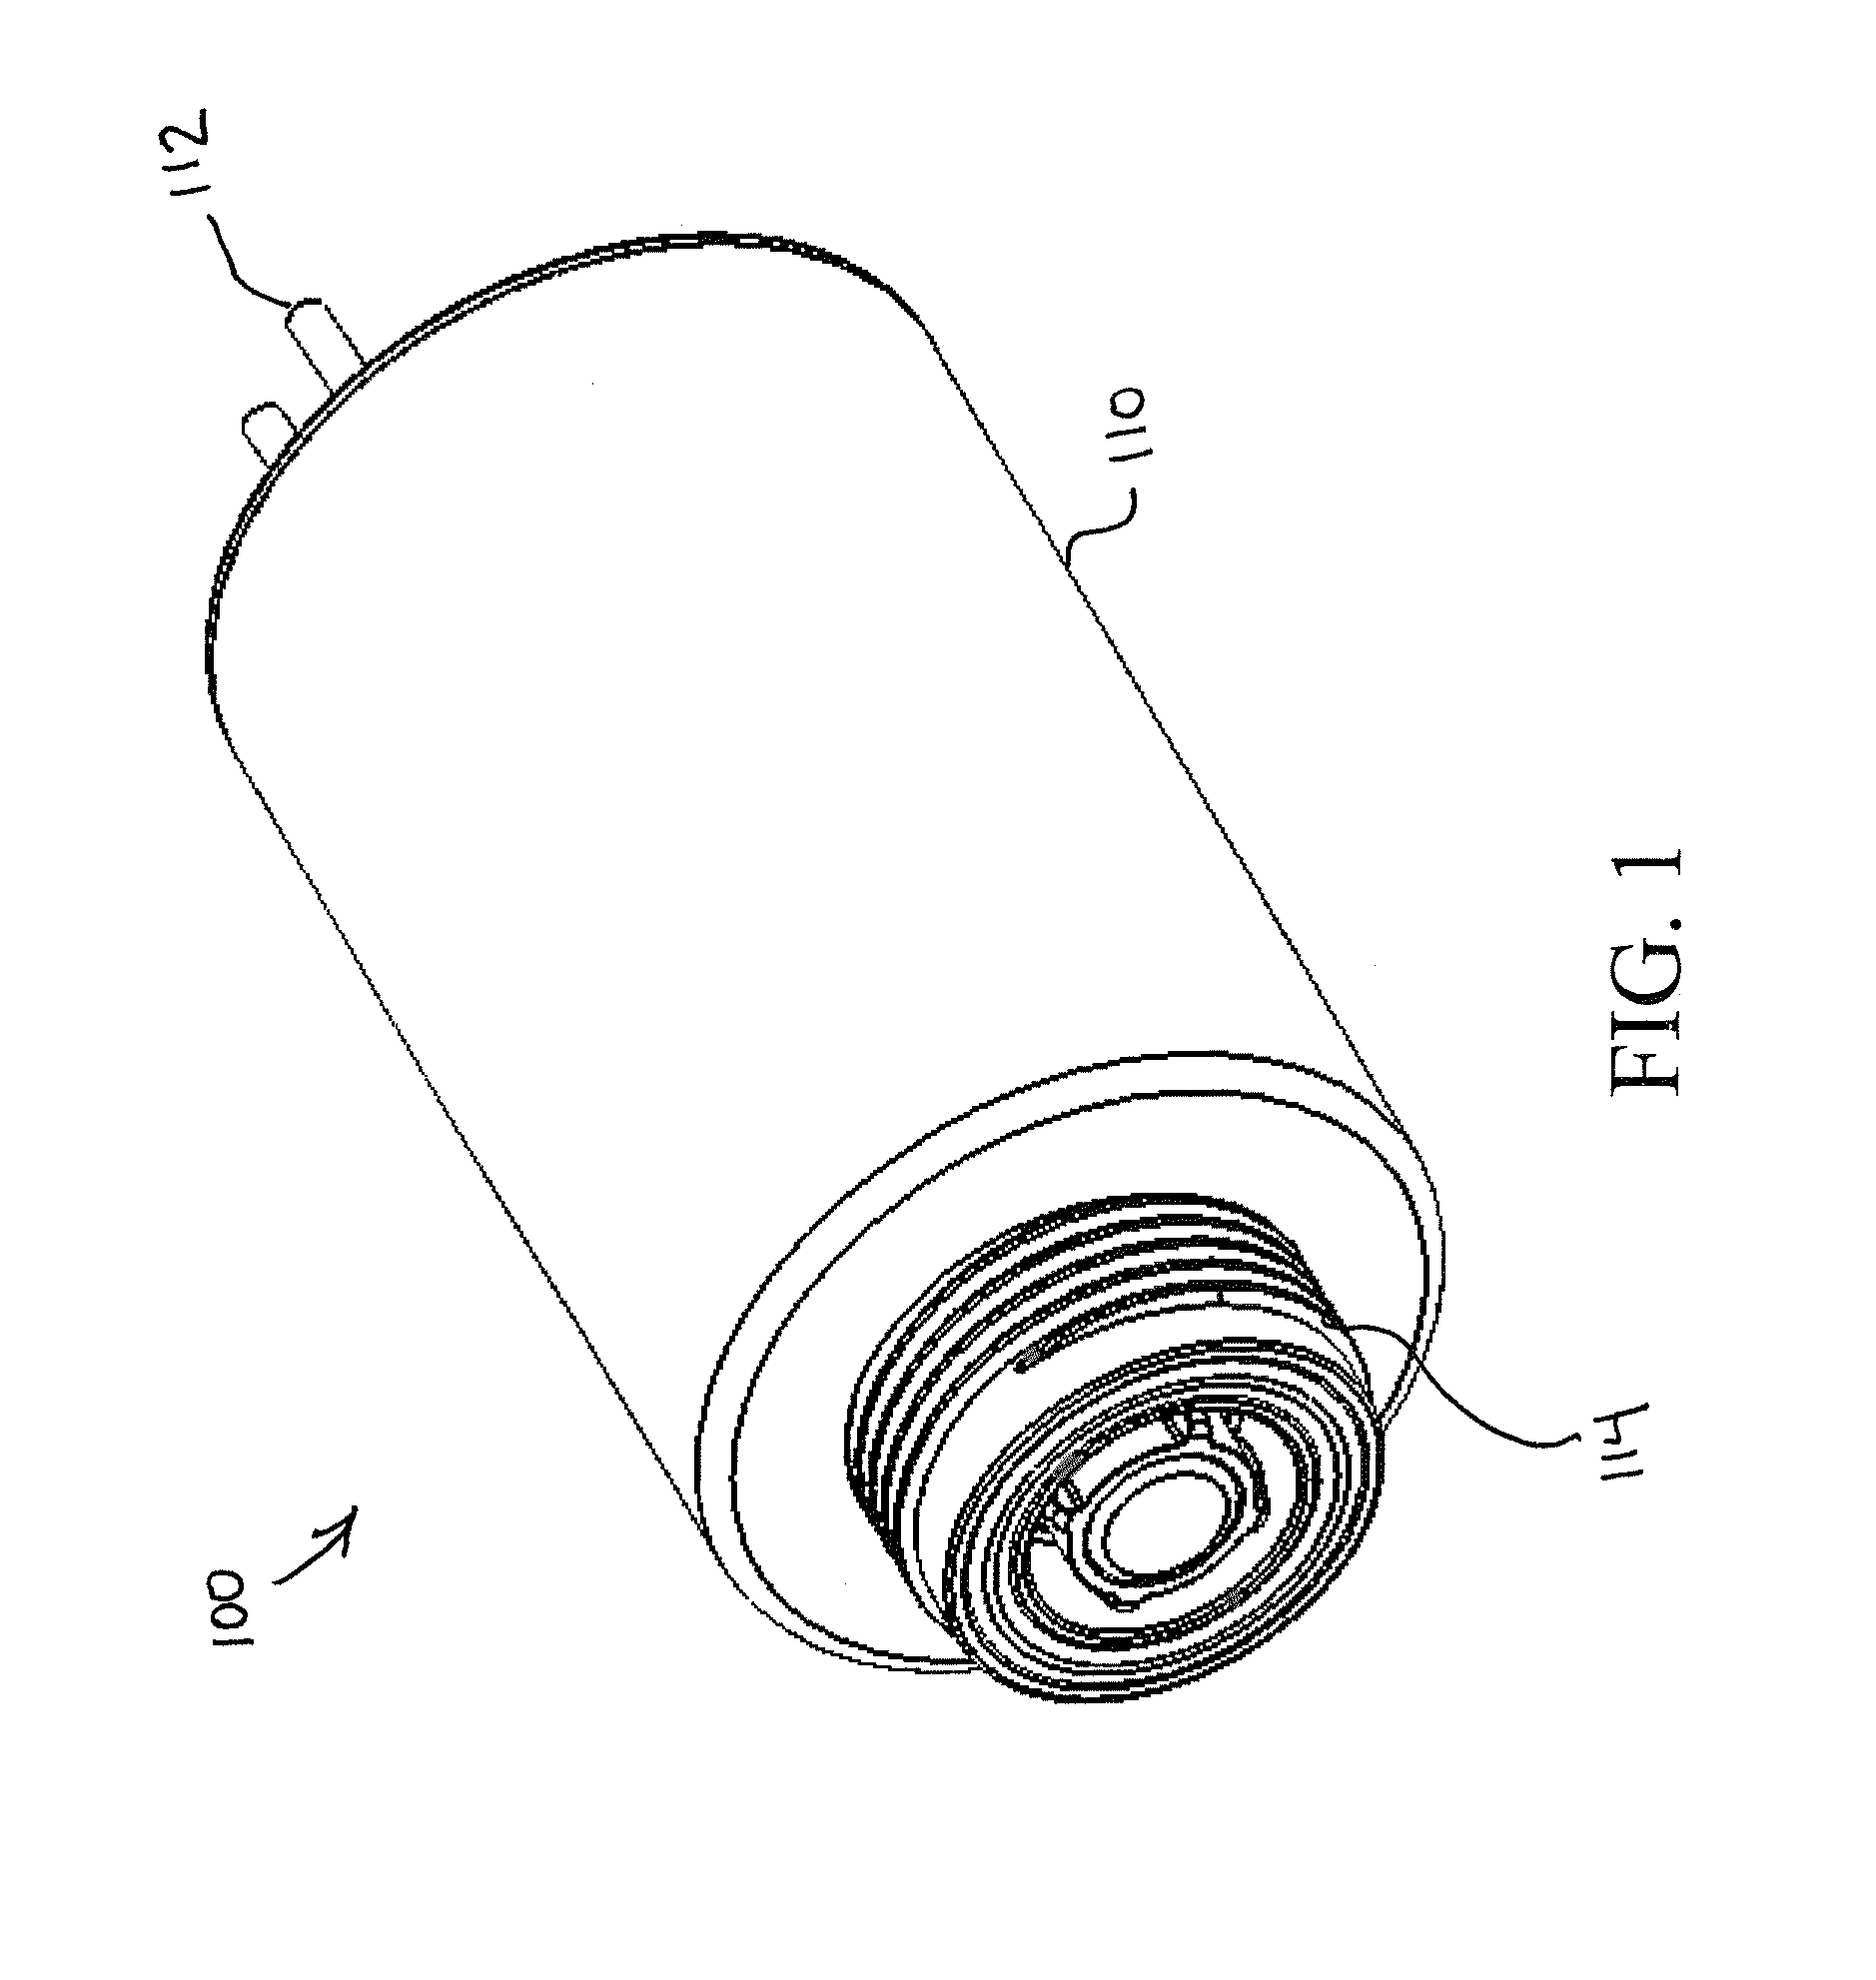 Power-efficient actuator assemblies and methods of manufacture